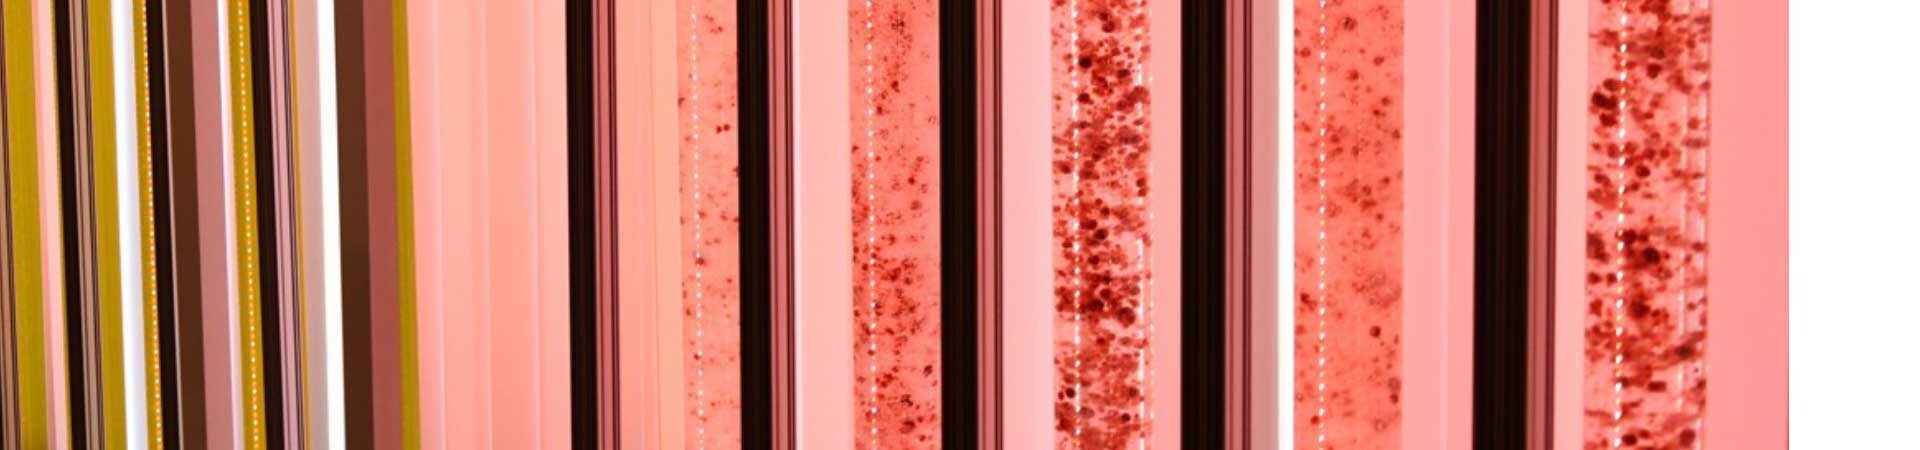 Photo showing vertical tubes with reddish algal solutions bubbling inside